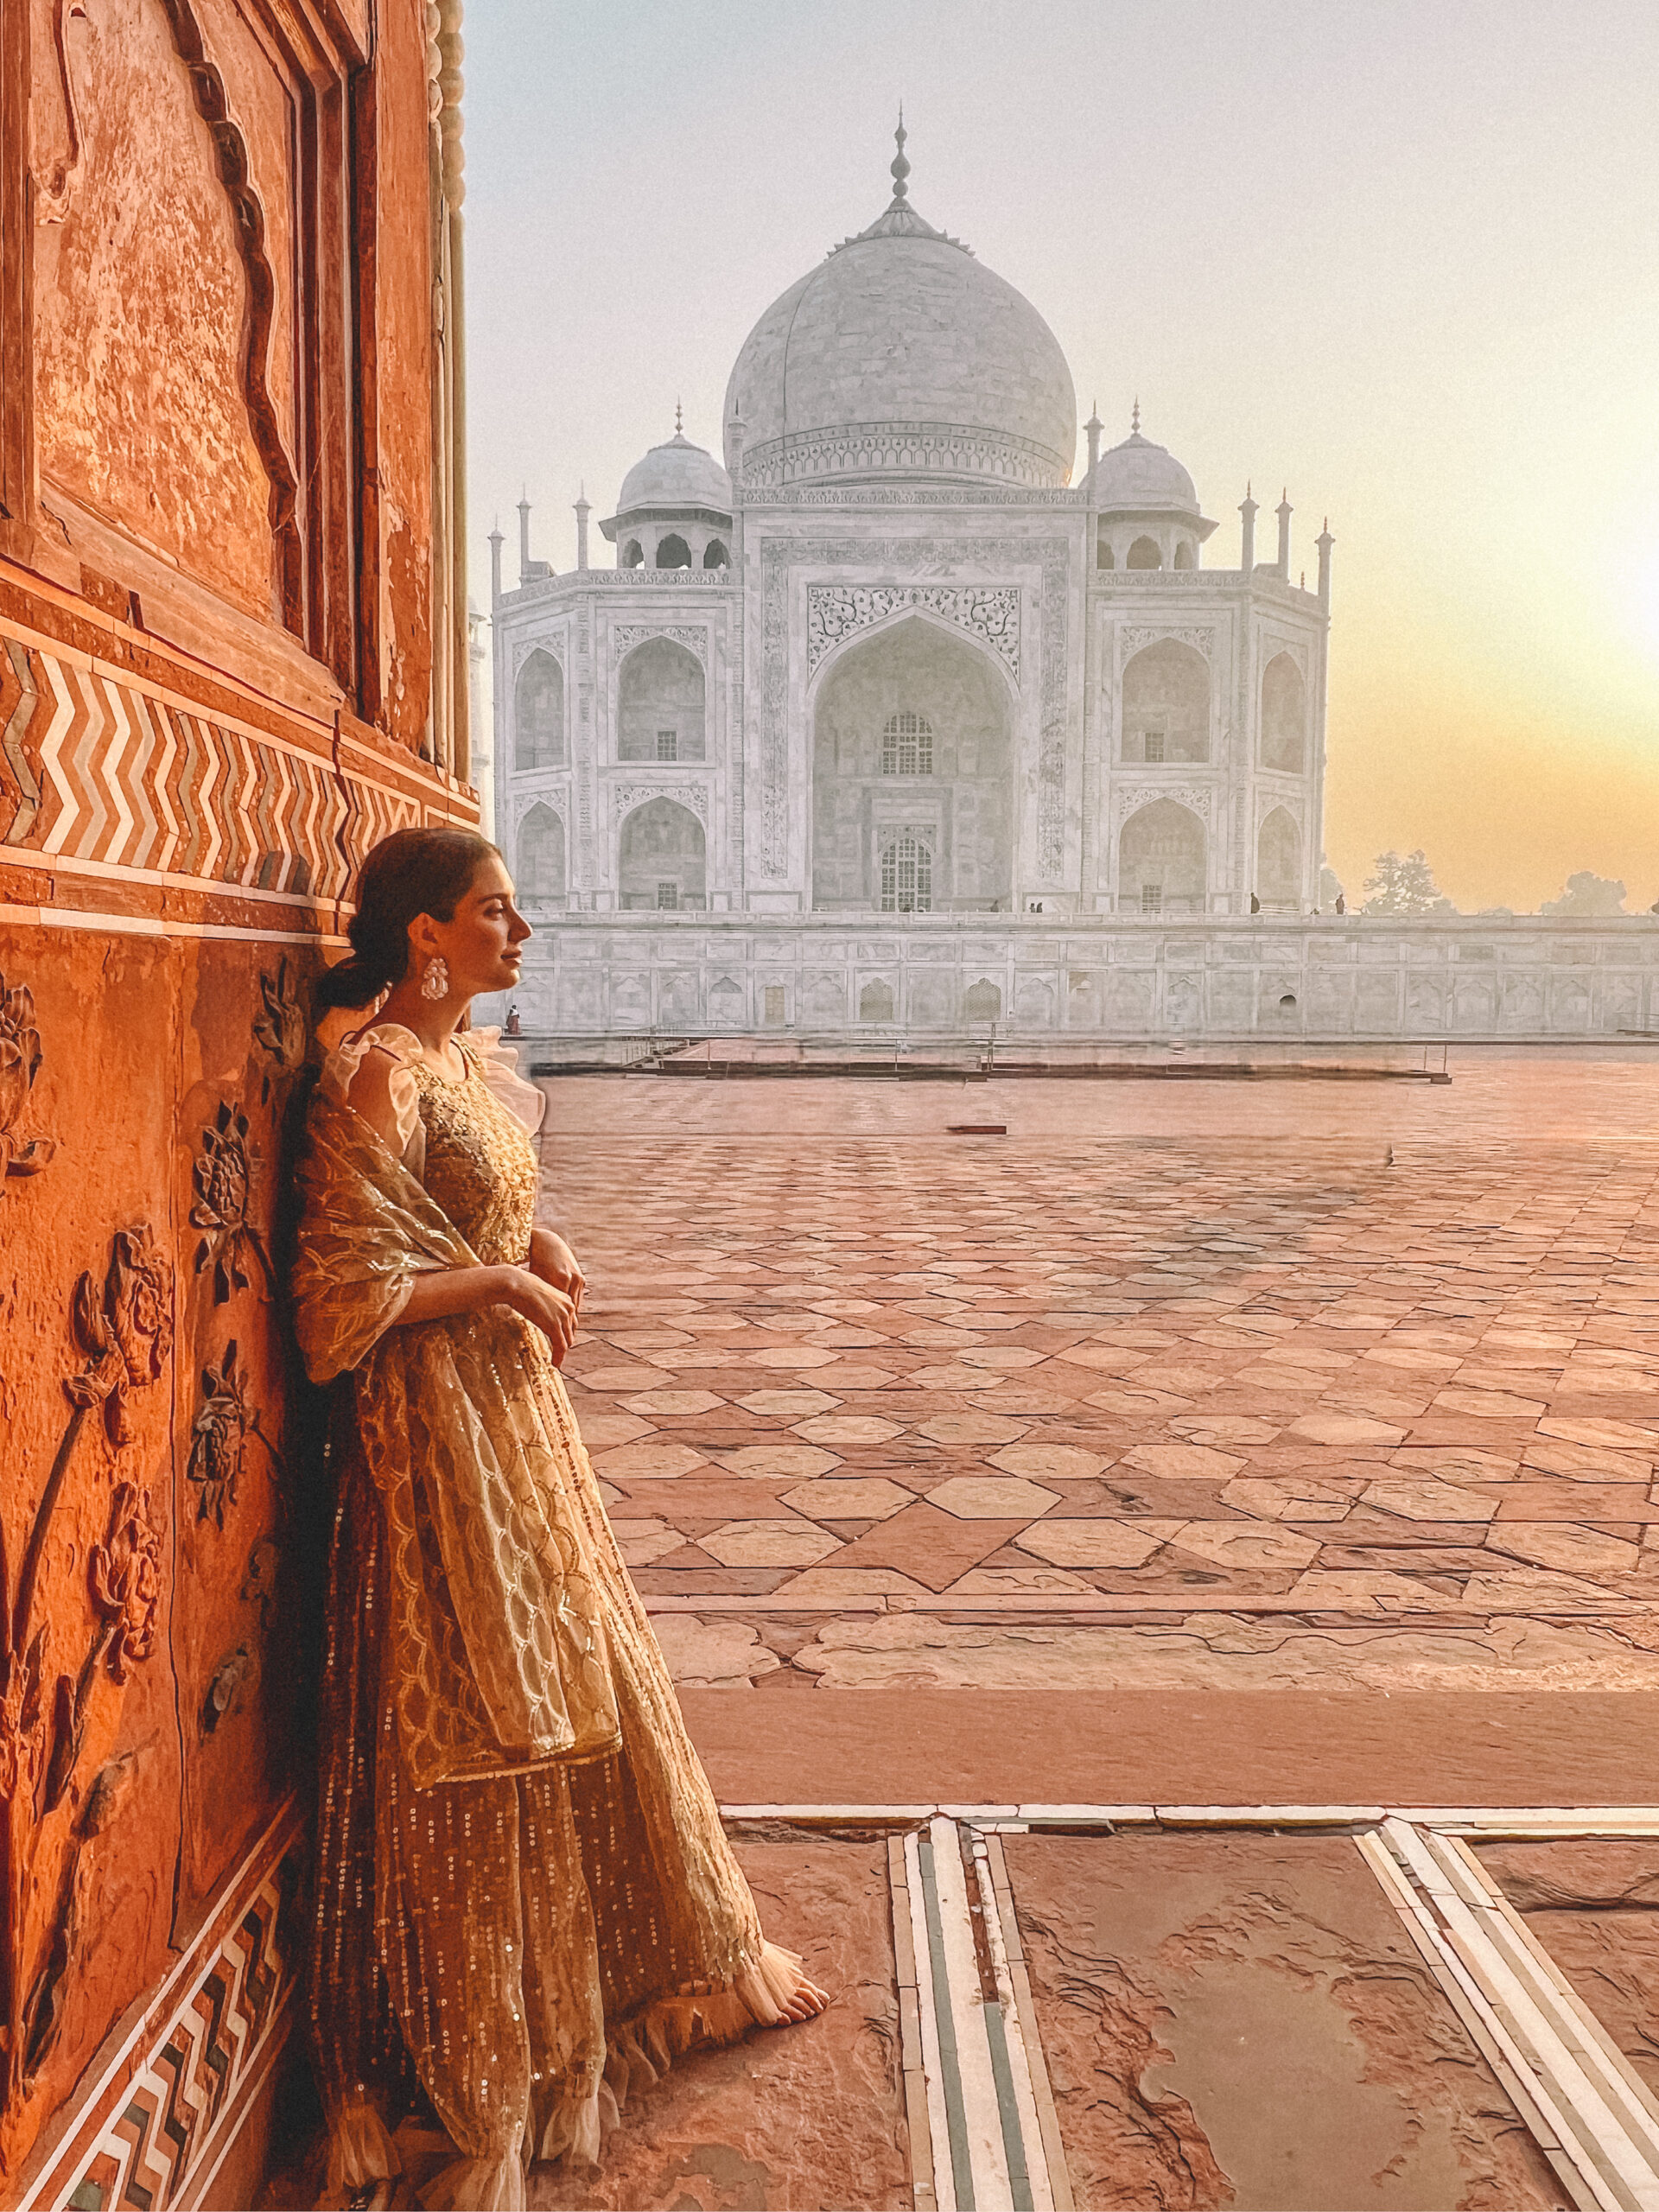 Taj Mahal Travel Tips: What you need to know before visiting